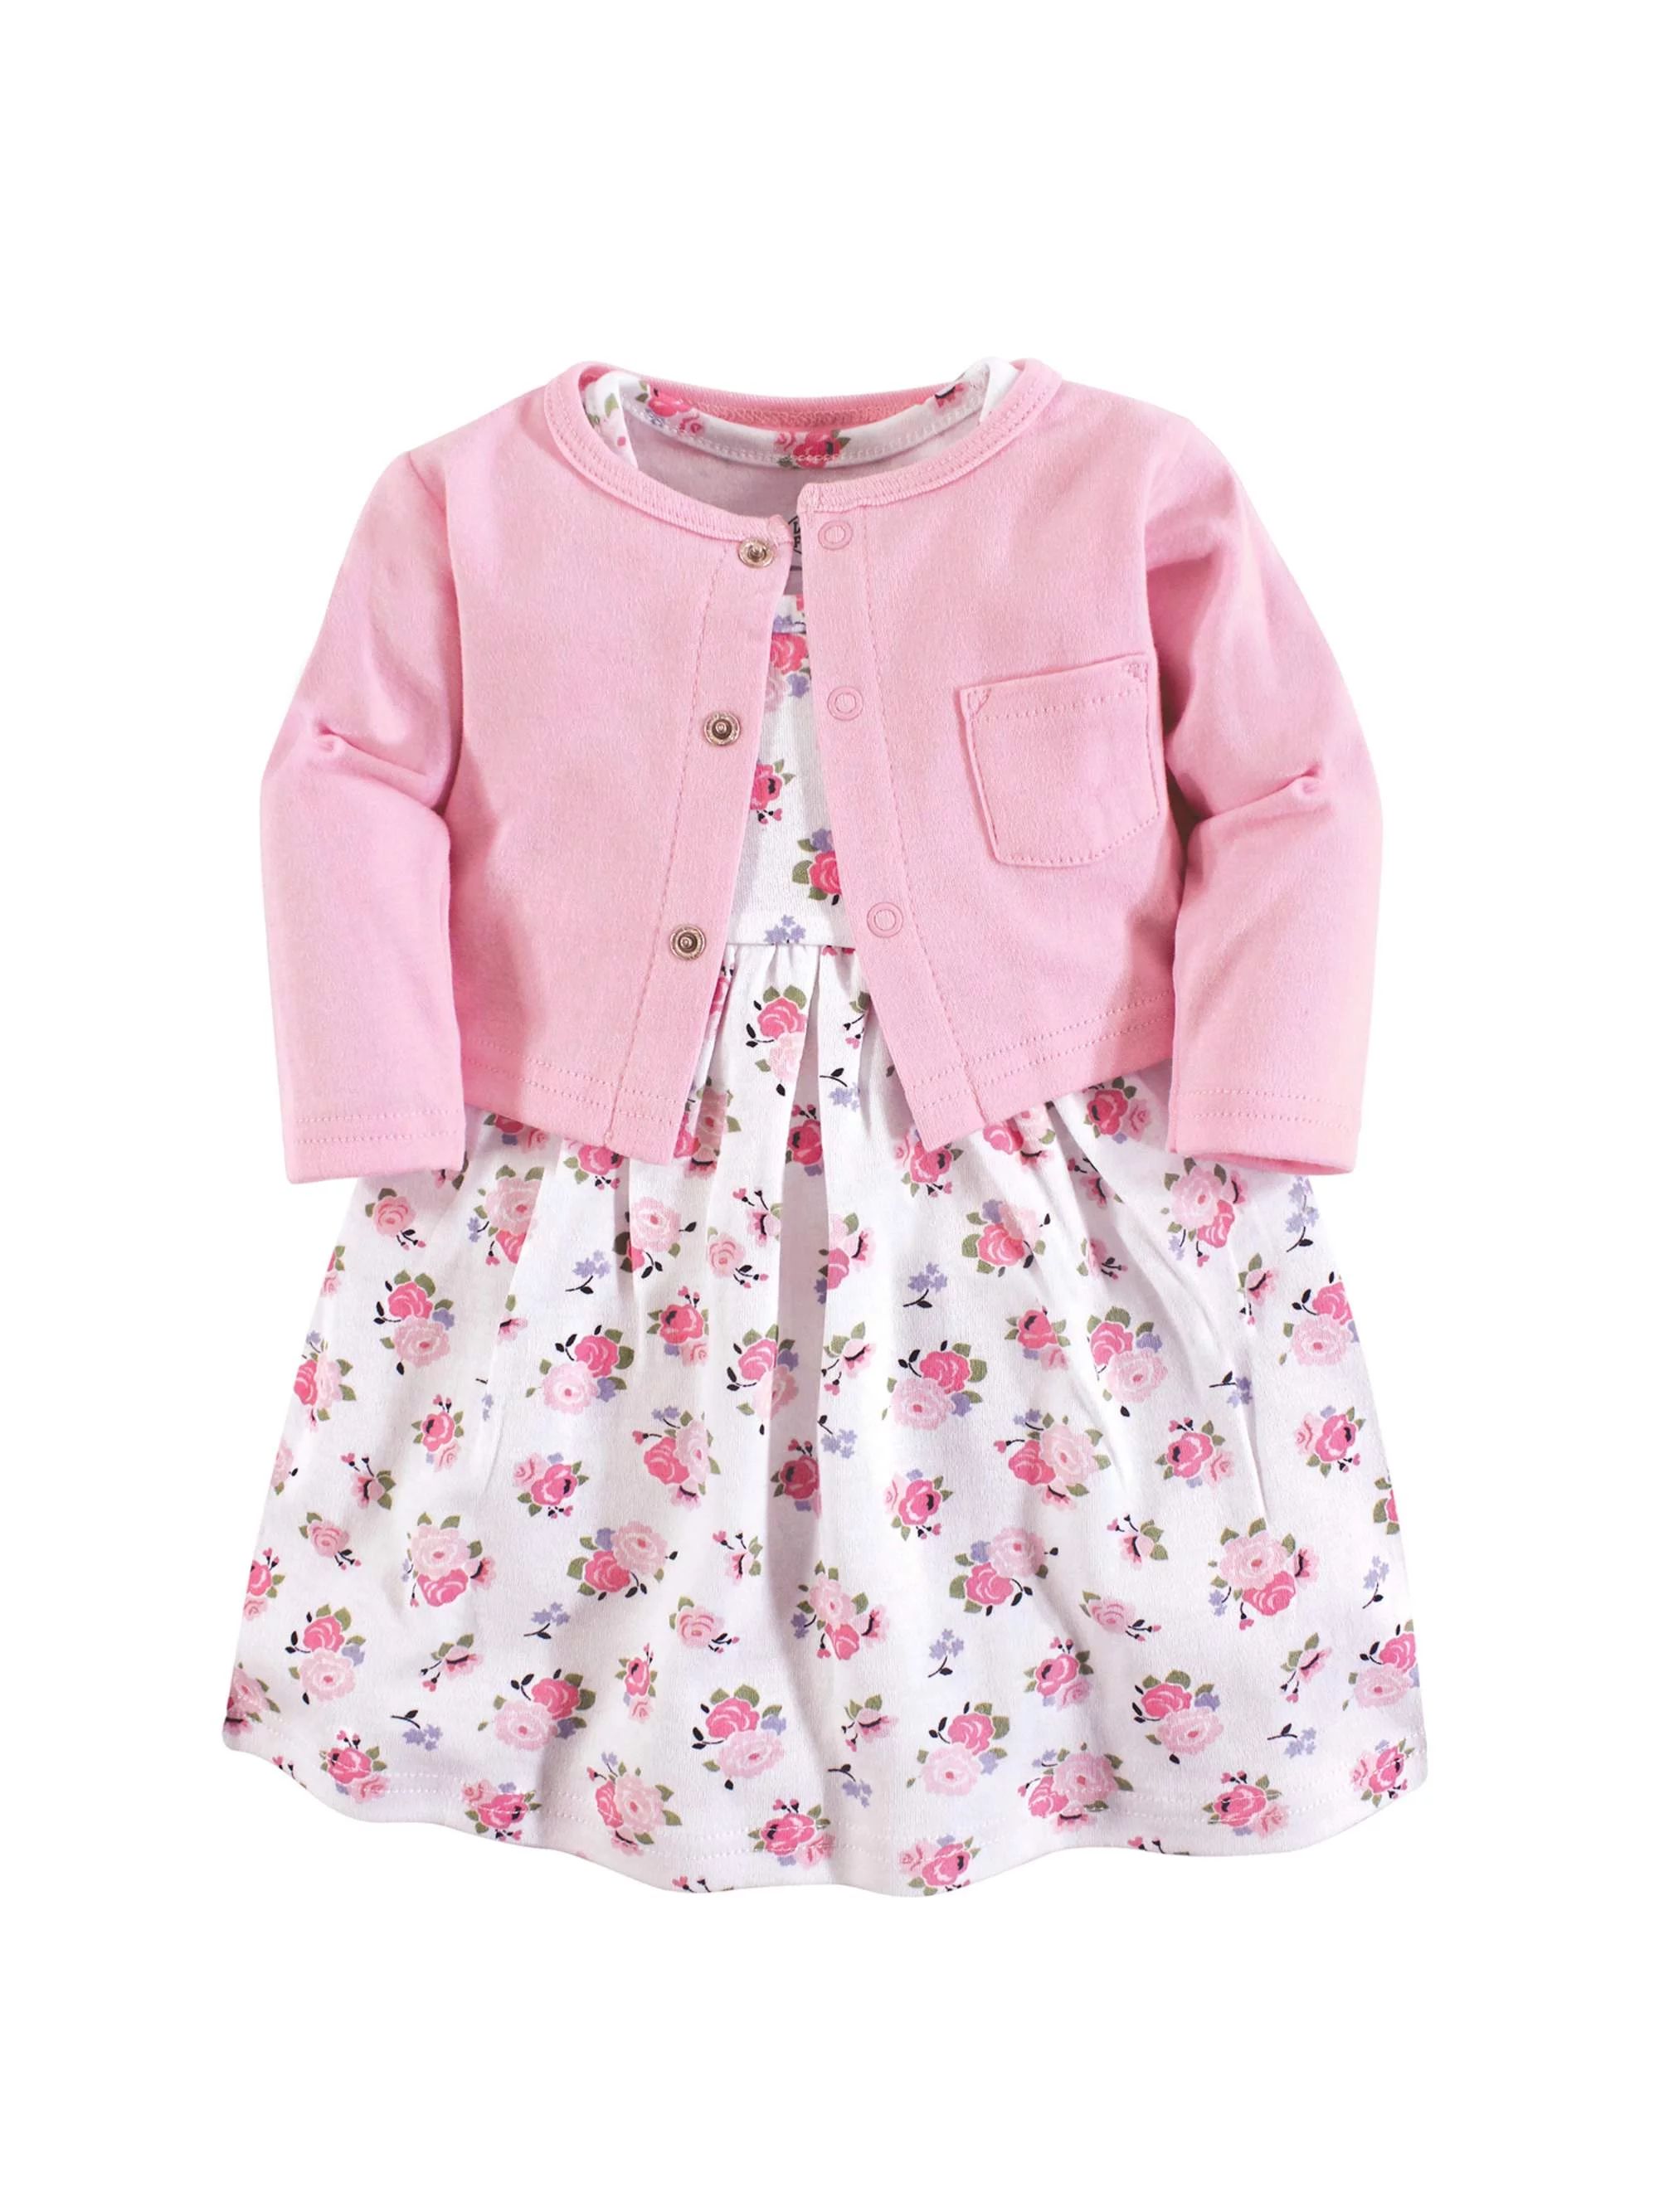 Luvable Friends Baby Girl Dress & Cardigan, 2pc Outfit Set | Walmart (US)